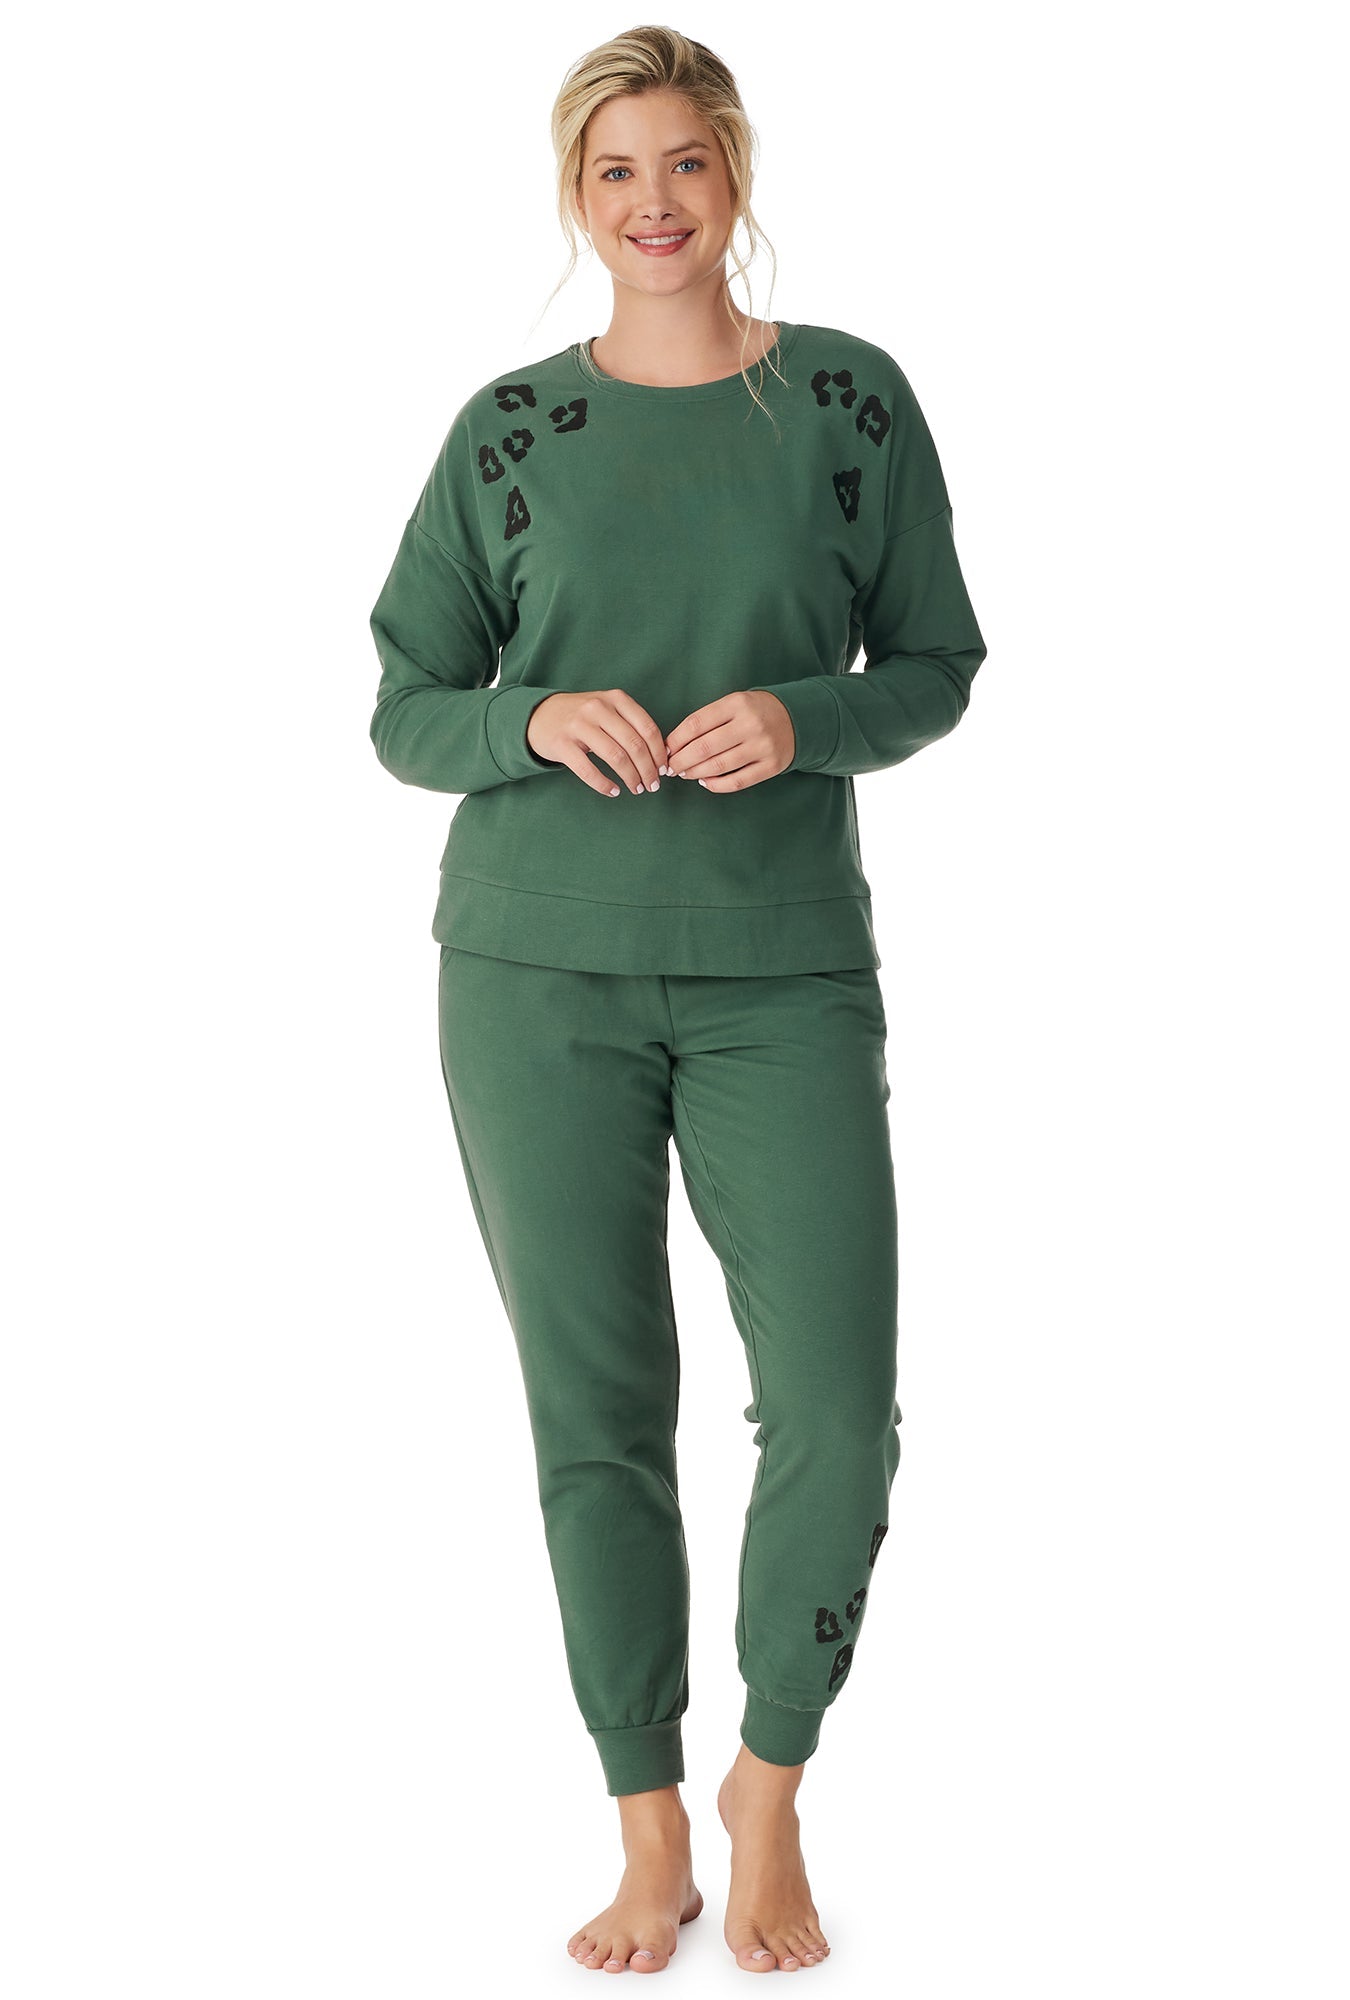 A lady wearing a green long sleeve crew embroidered lounge set.